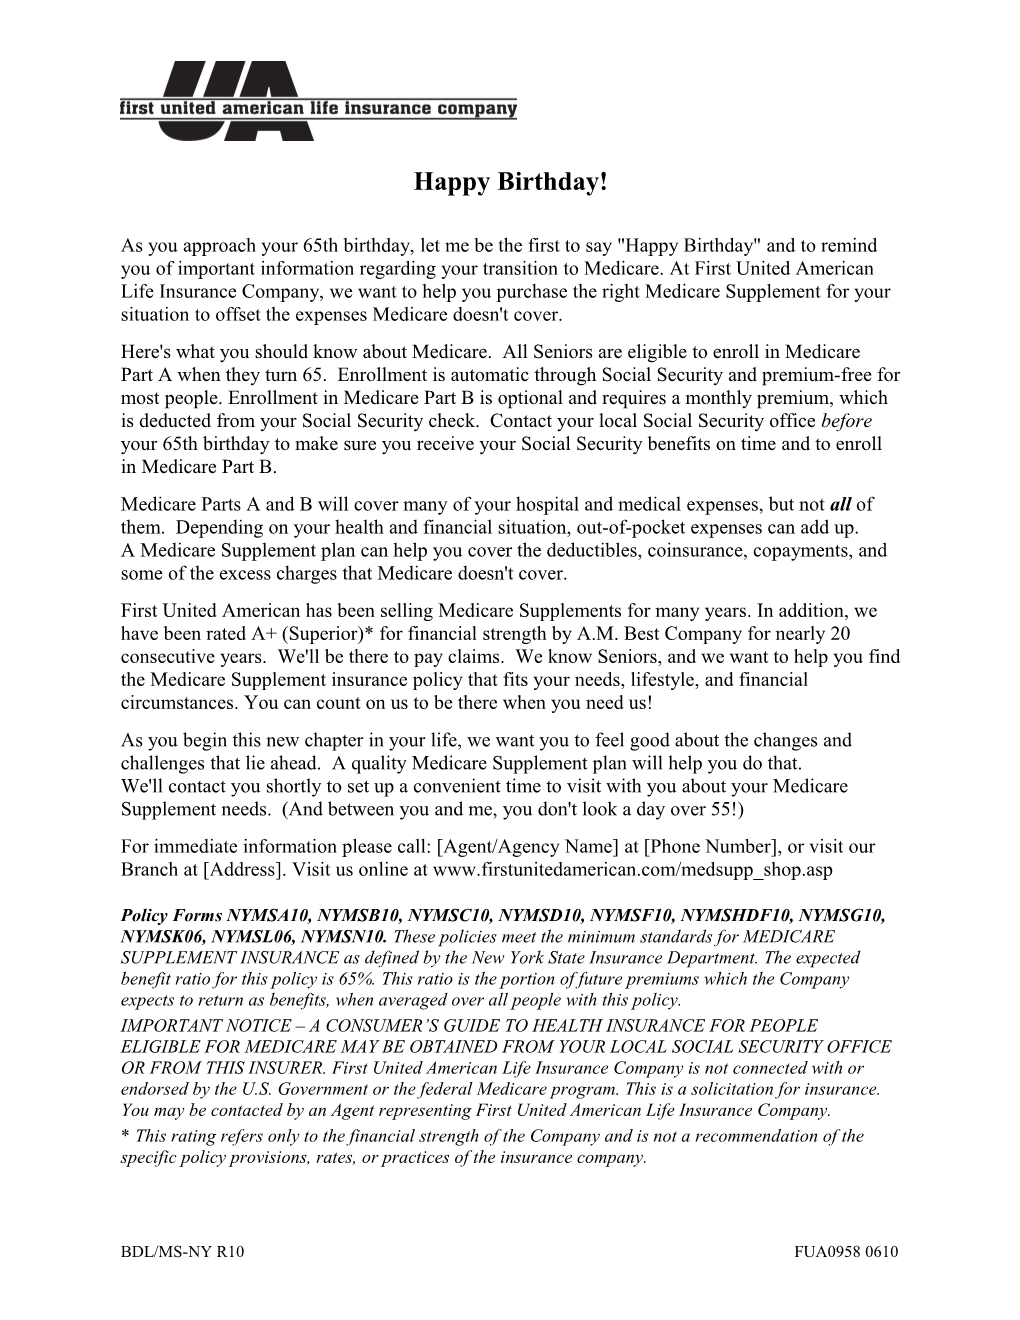 2010 First UA Birthday Letter